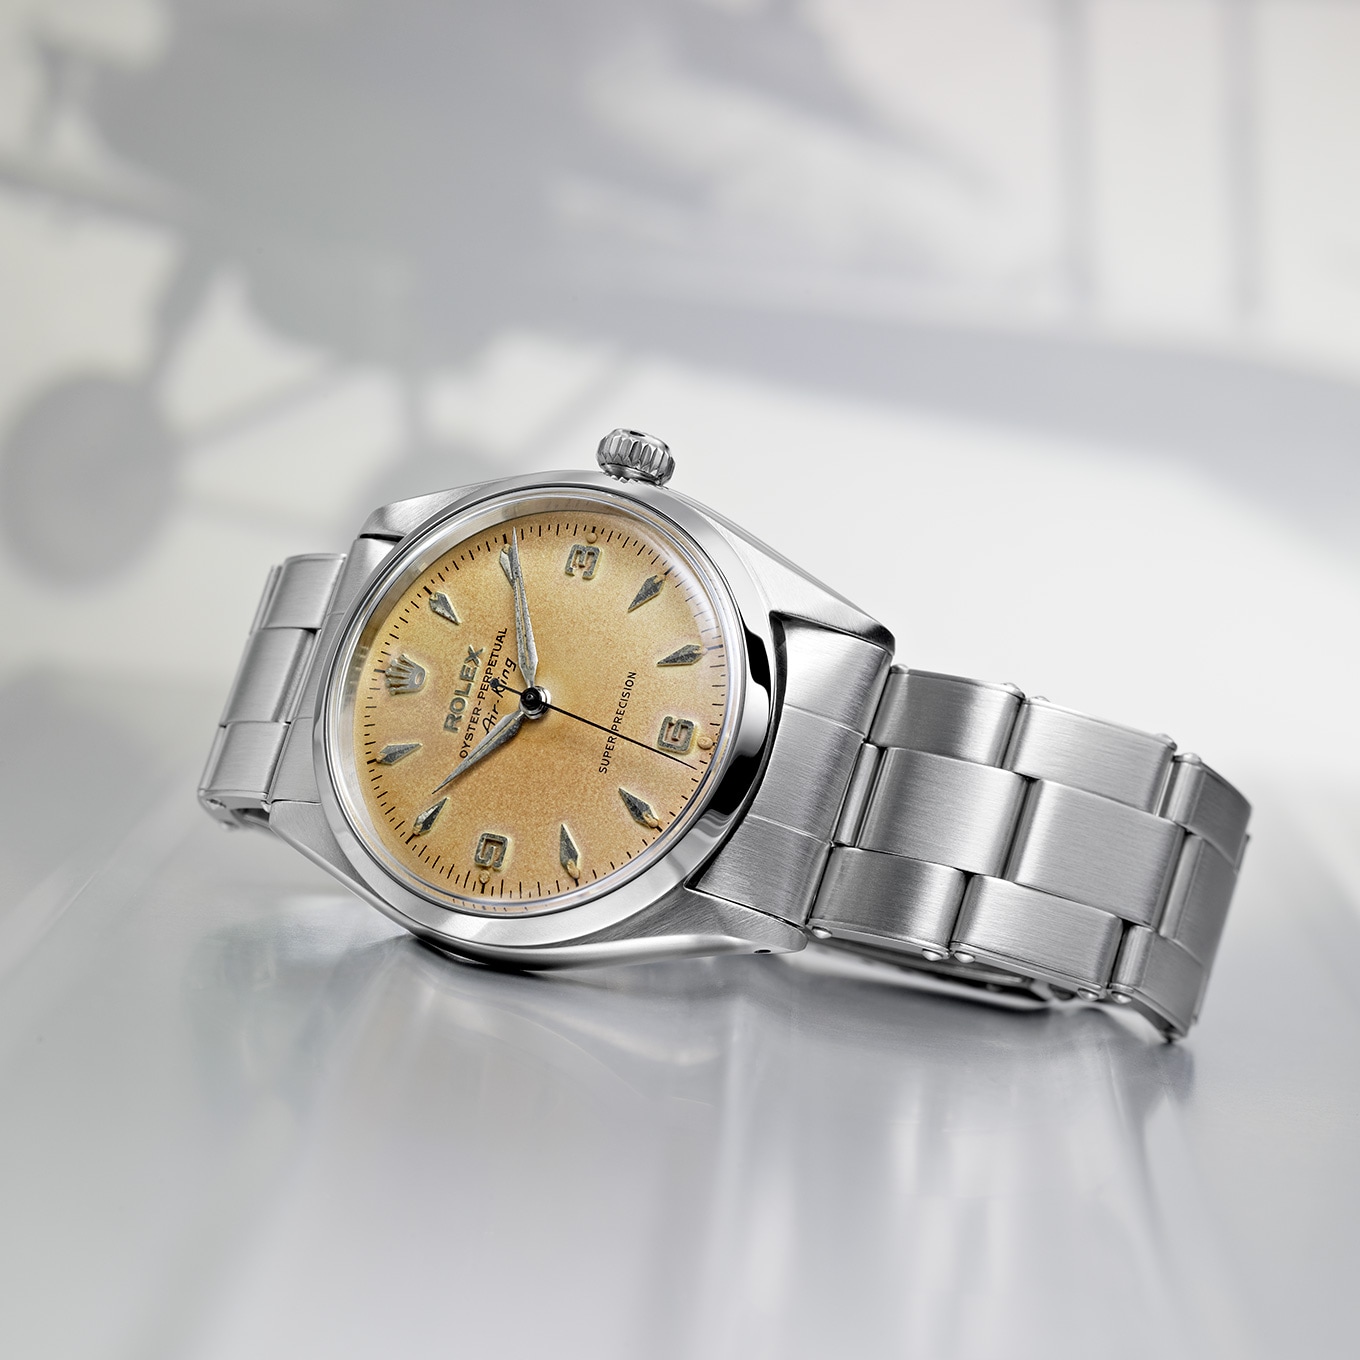 Rolex Datejust, Reference 69173, A Yellow Gold And Stainless Steel Wristwatch With Date And Bracelet, Retailed By Tiffany & Co., Circa 1988 | 勞力士 Dat###Rolex GMT-Master 1675 Palletoni , Jubilèe , anno 1977